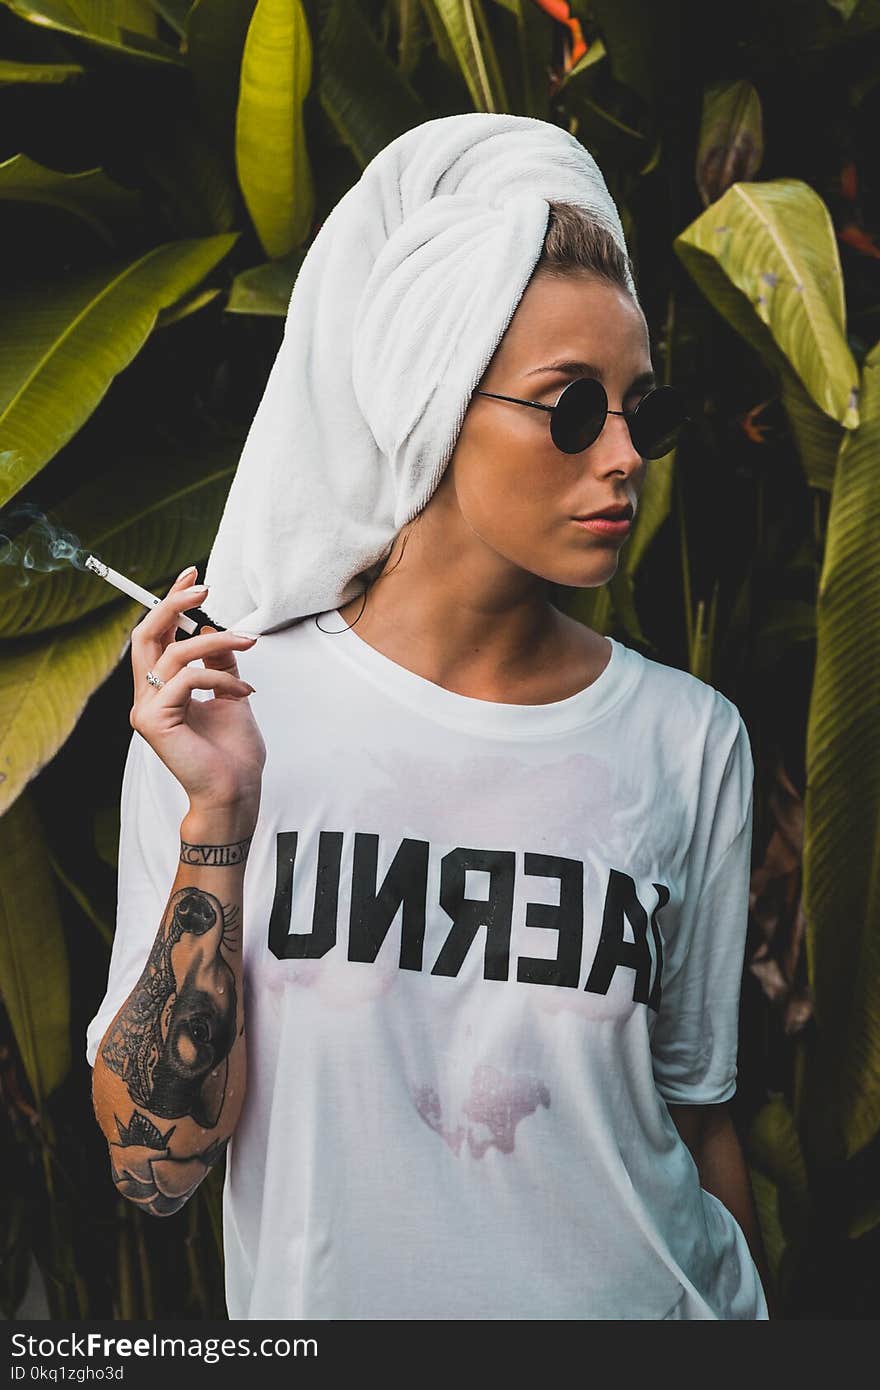 Woman Wearing White Crew-neck Shirt and Black Framed Sunglasses With White Bath Towel on Her Head Holding Cigarette Stick